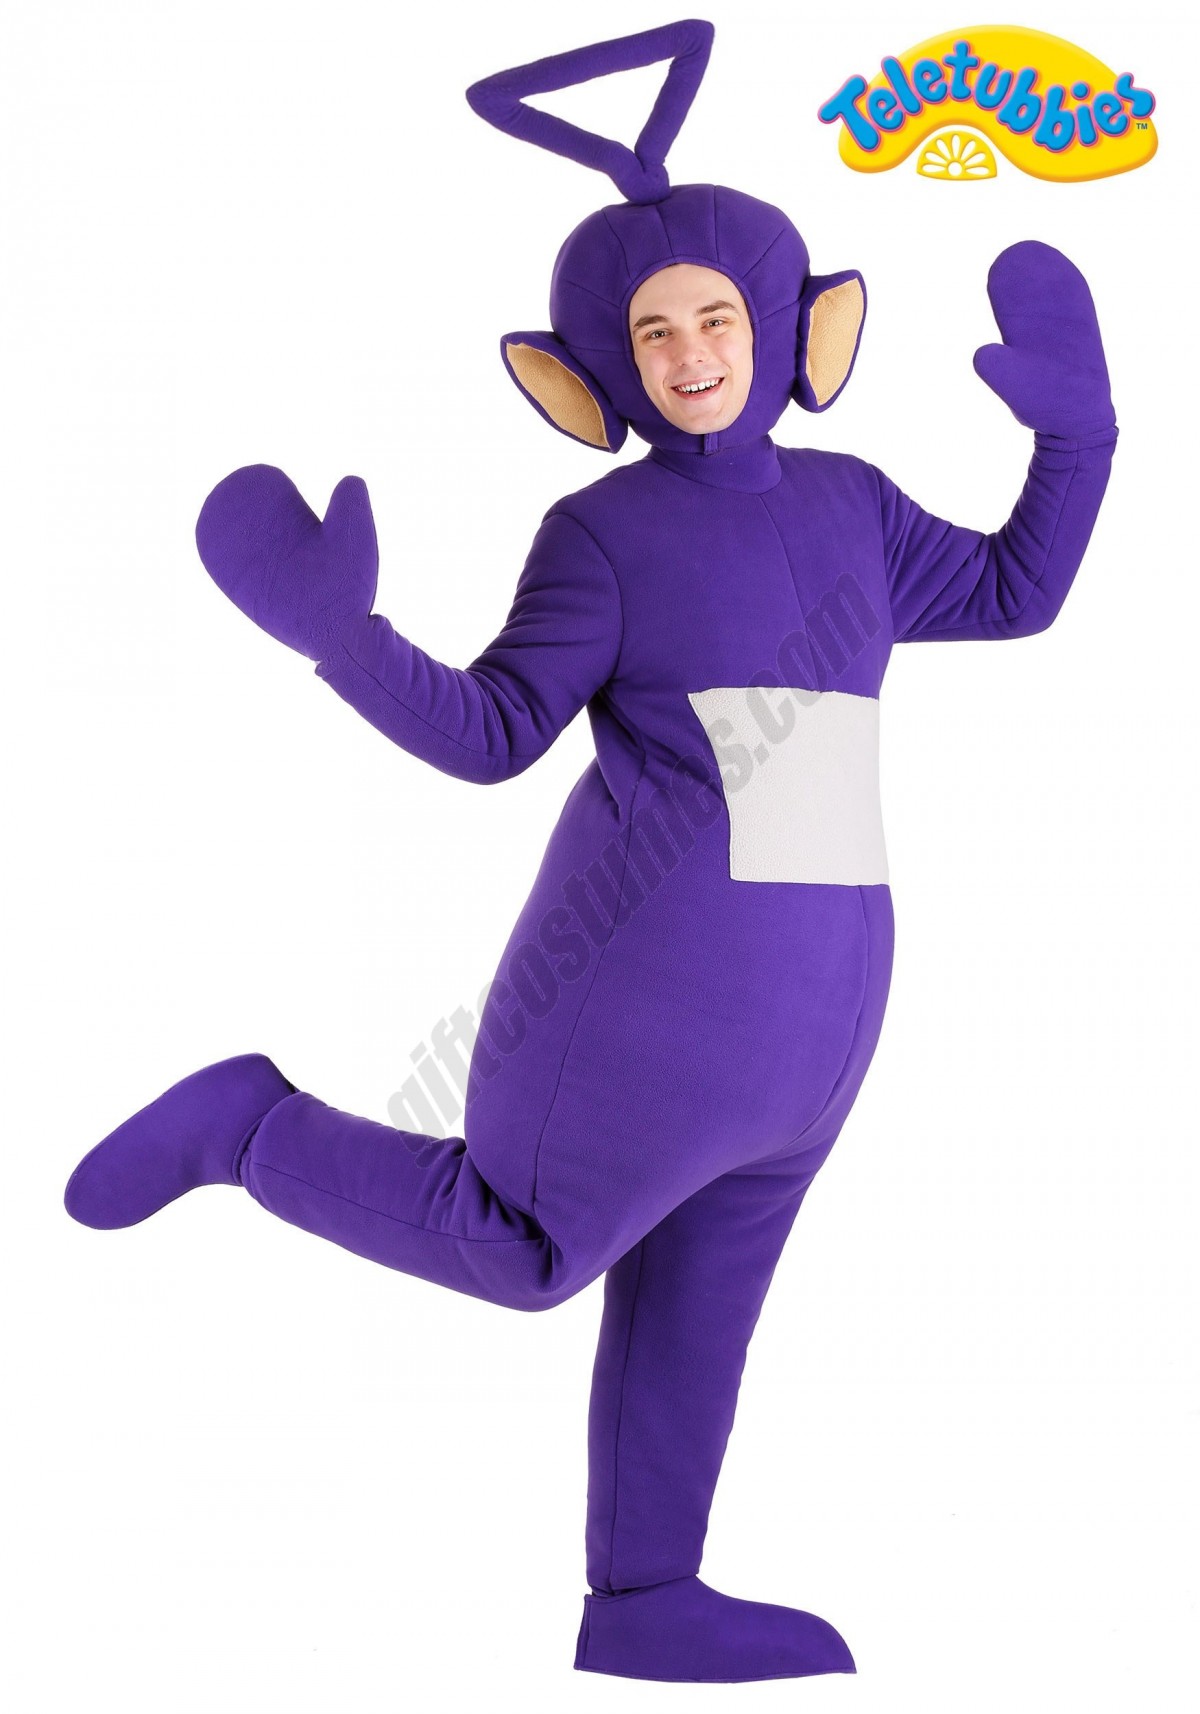 Tinky Winky Teletubbies Adult Costume Promotions - -0